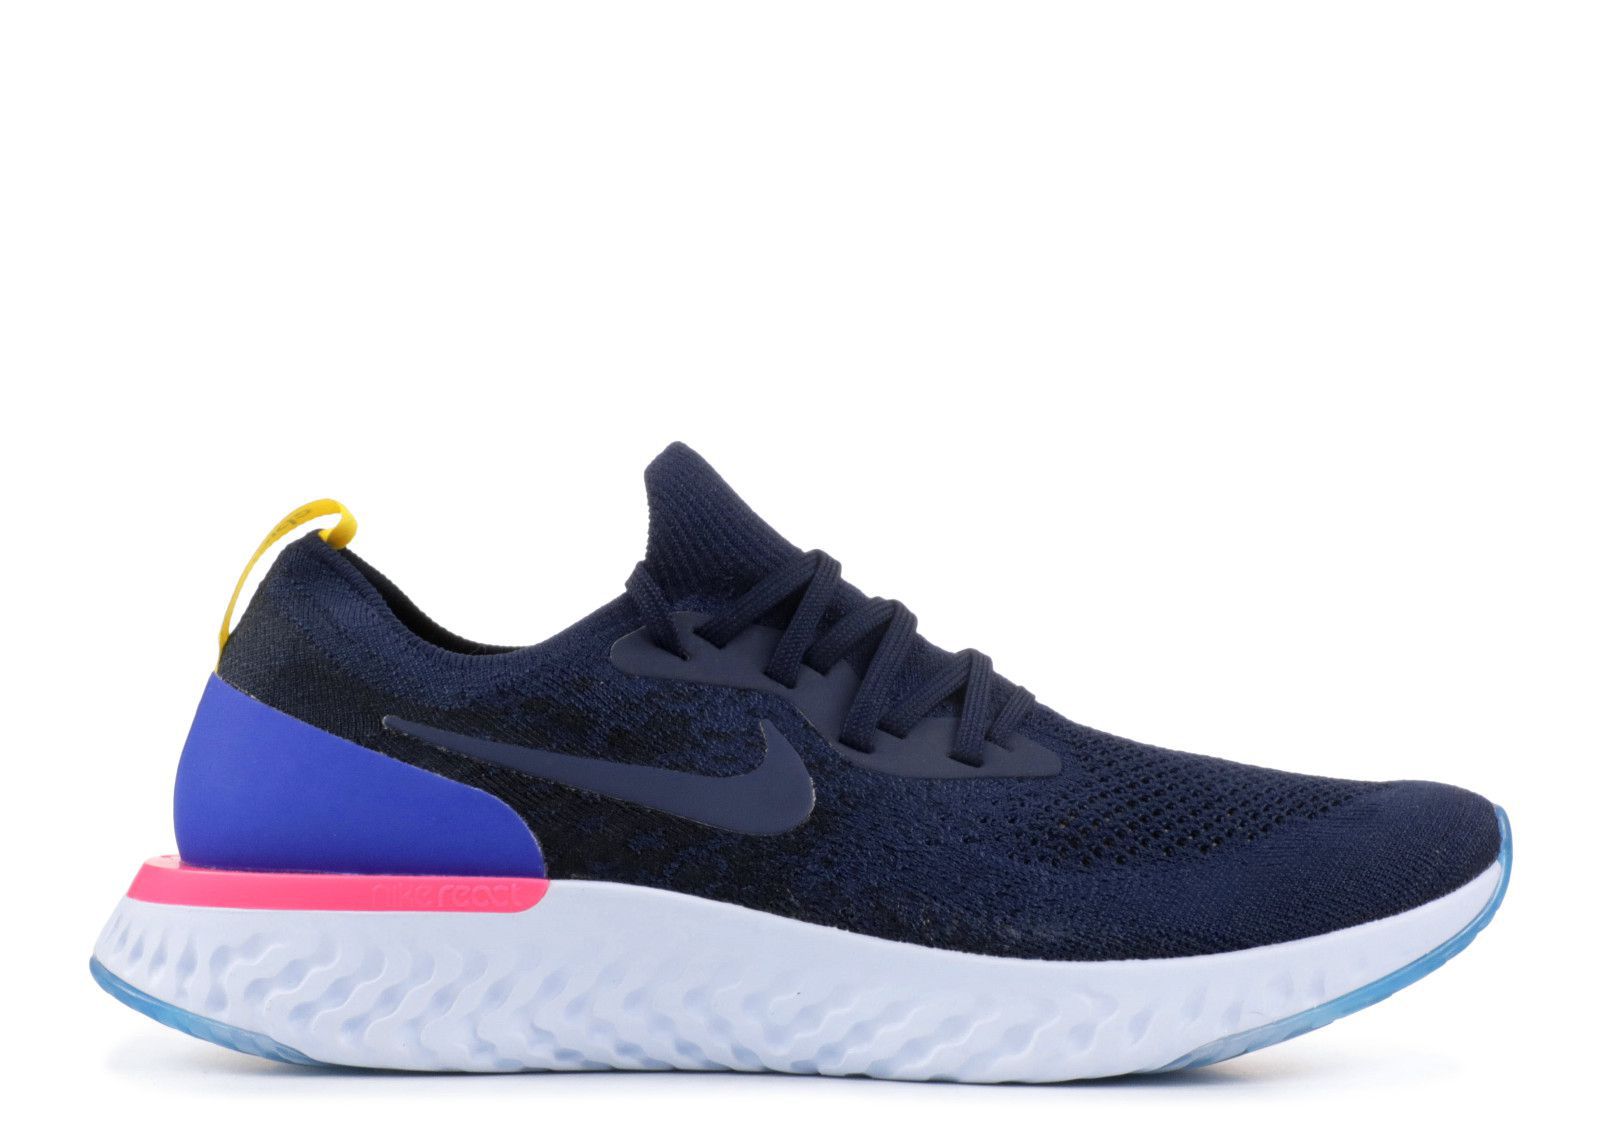 Nike EPIC REACT FLYKNIT Blue Running Shoes